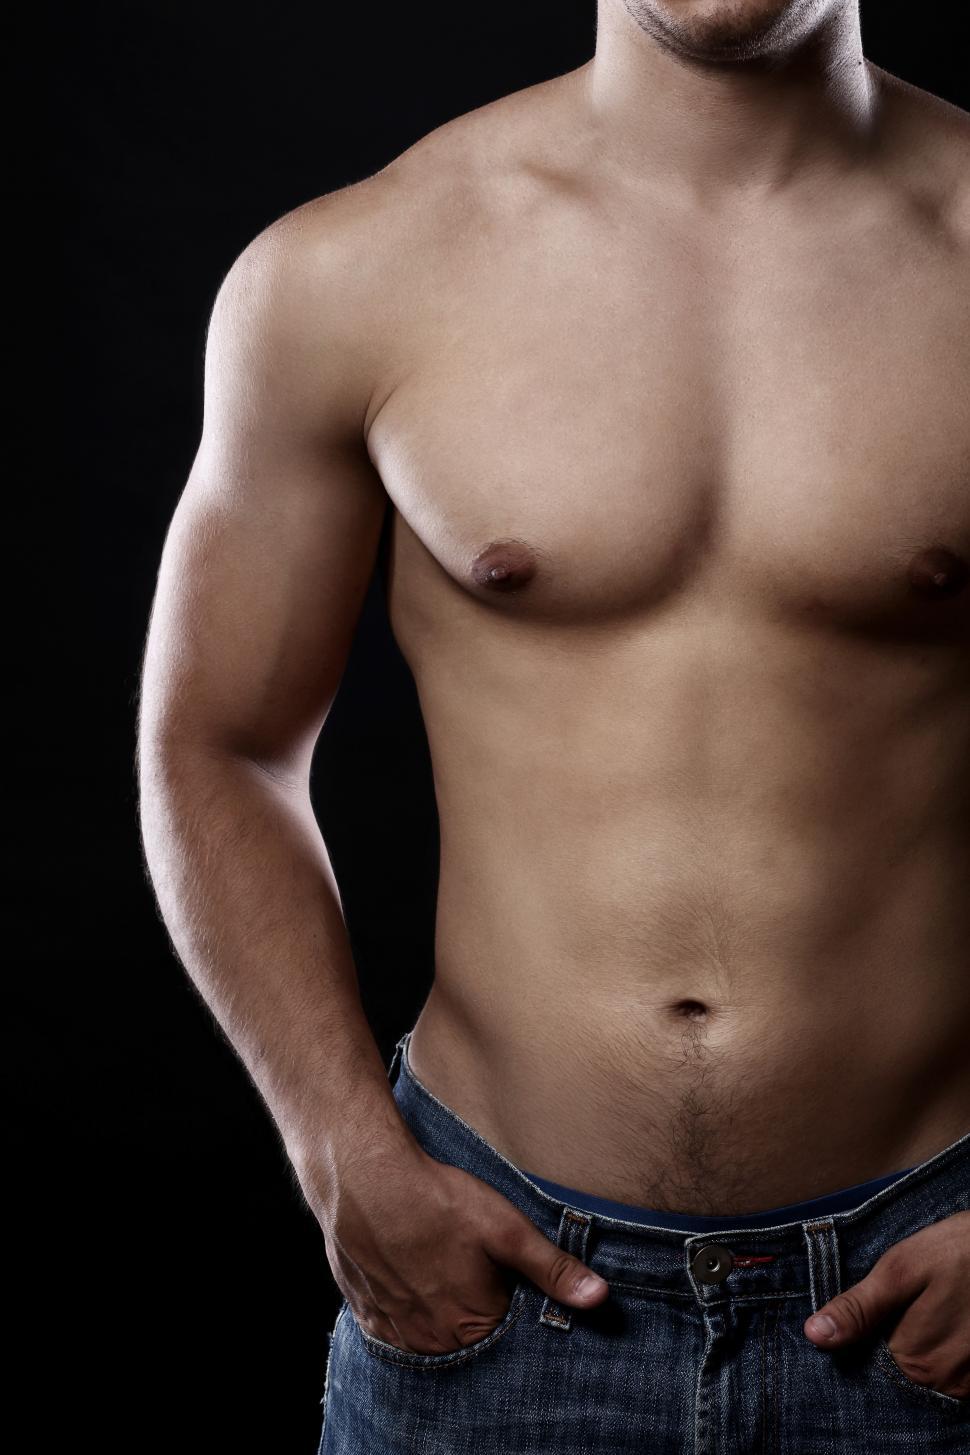 Free Image of Muscular torso of young man 